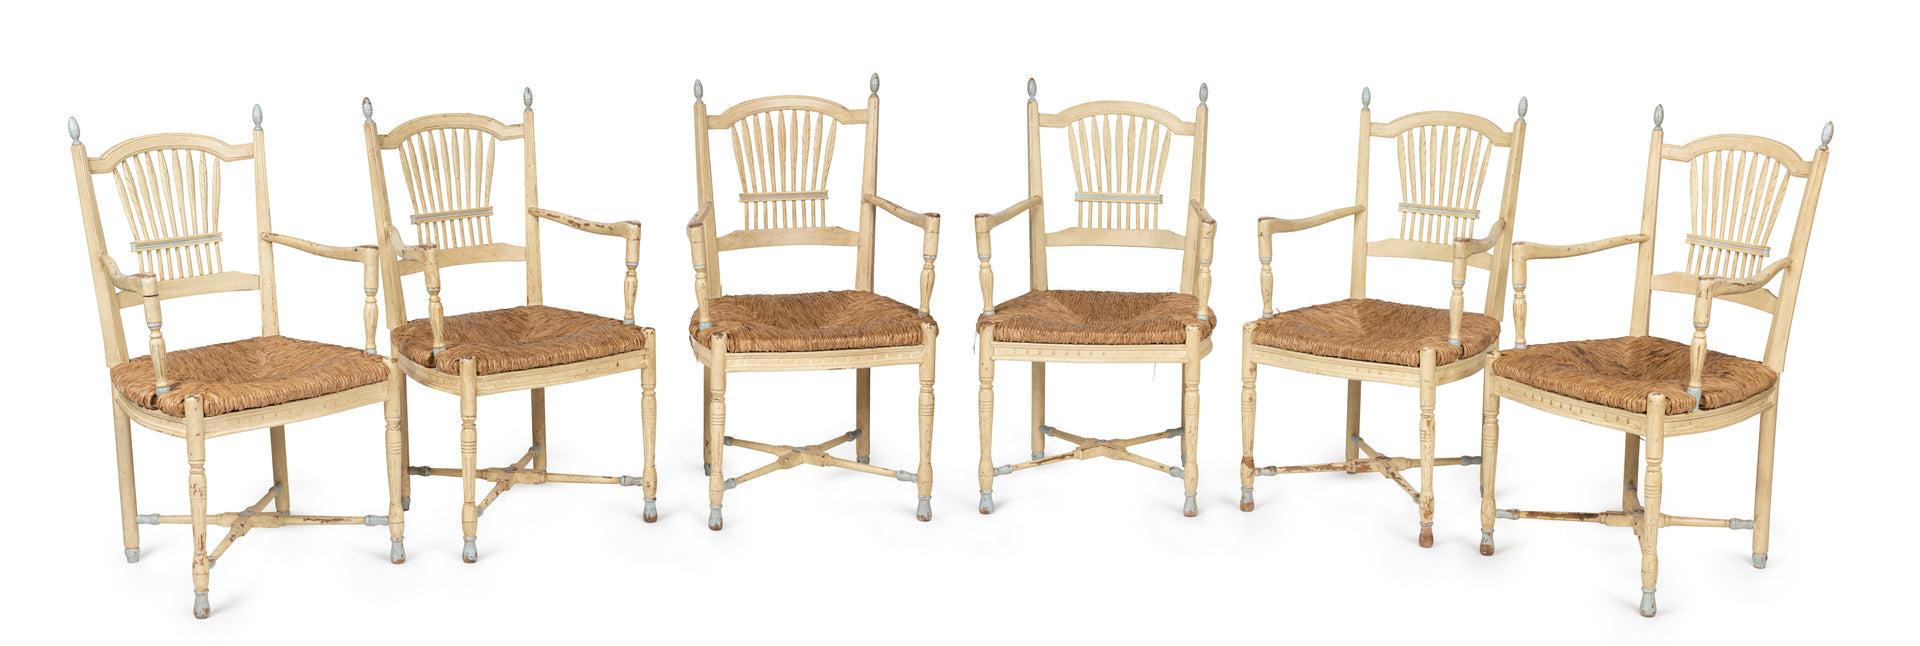 SOLD A set of six unusual painted timber Wheatsheaf design chairs, French Circa 1900